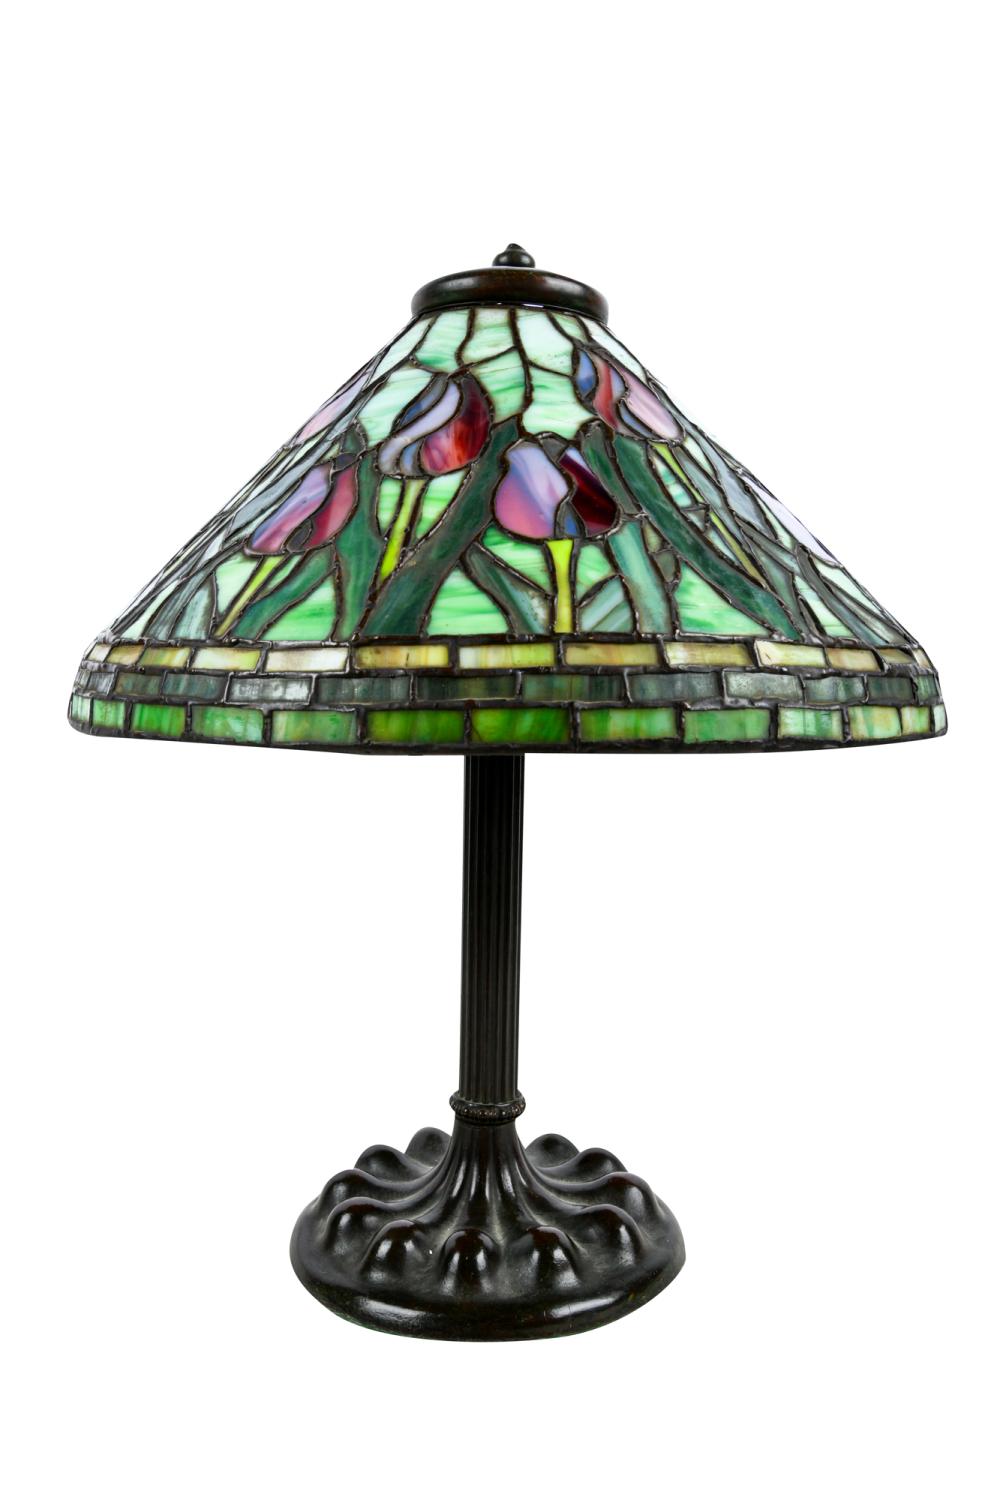 LEADED GLASS TABLE LAMPunsigned shade